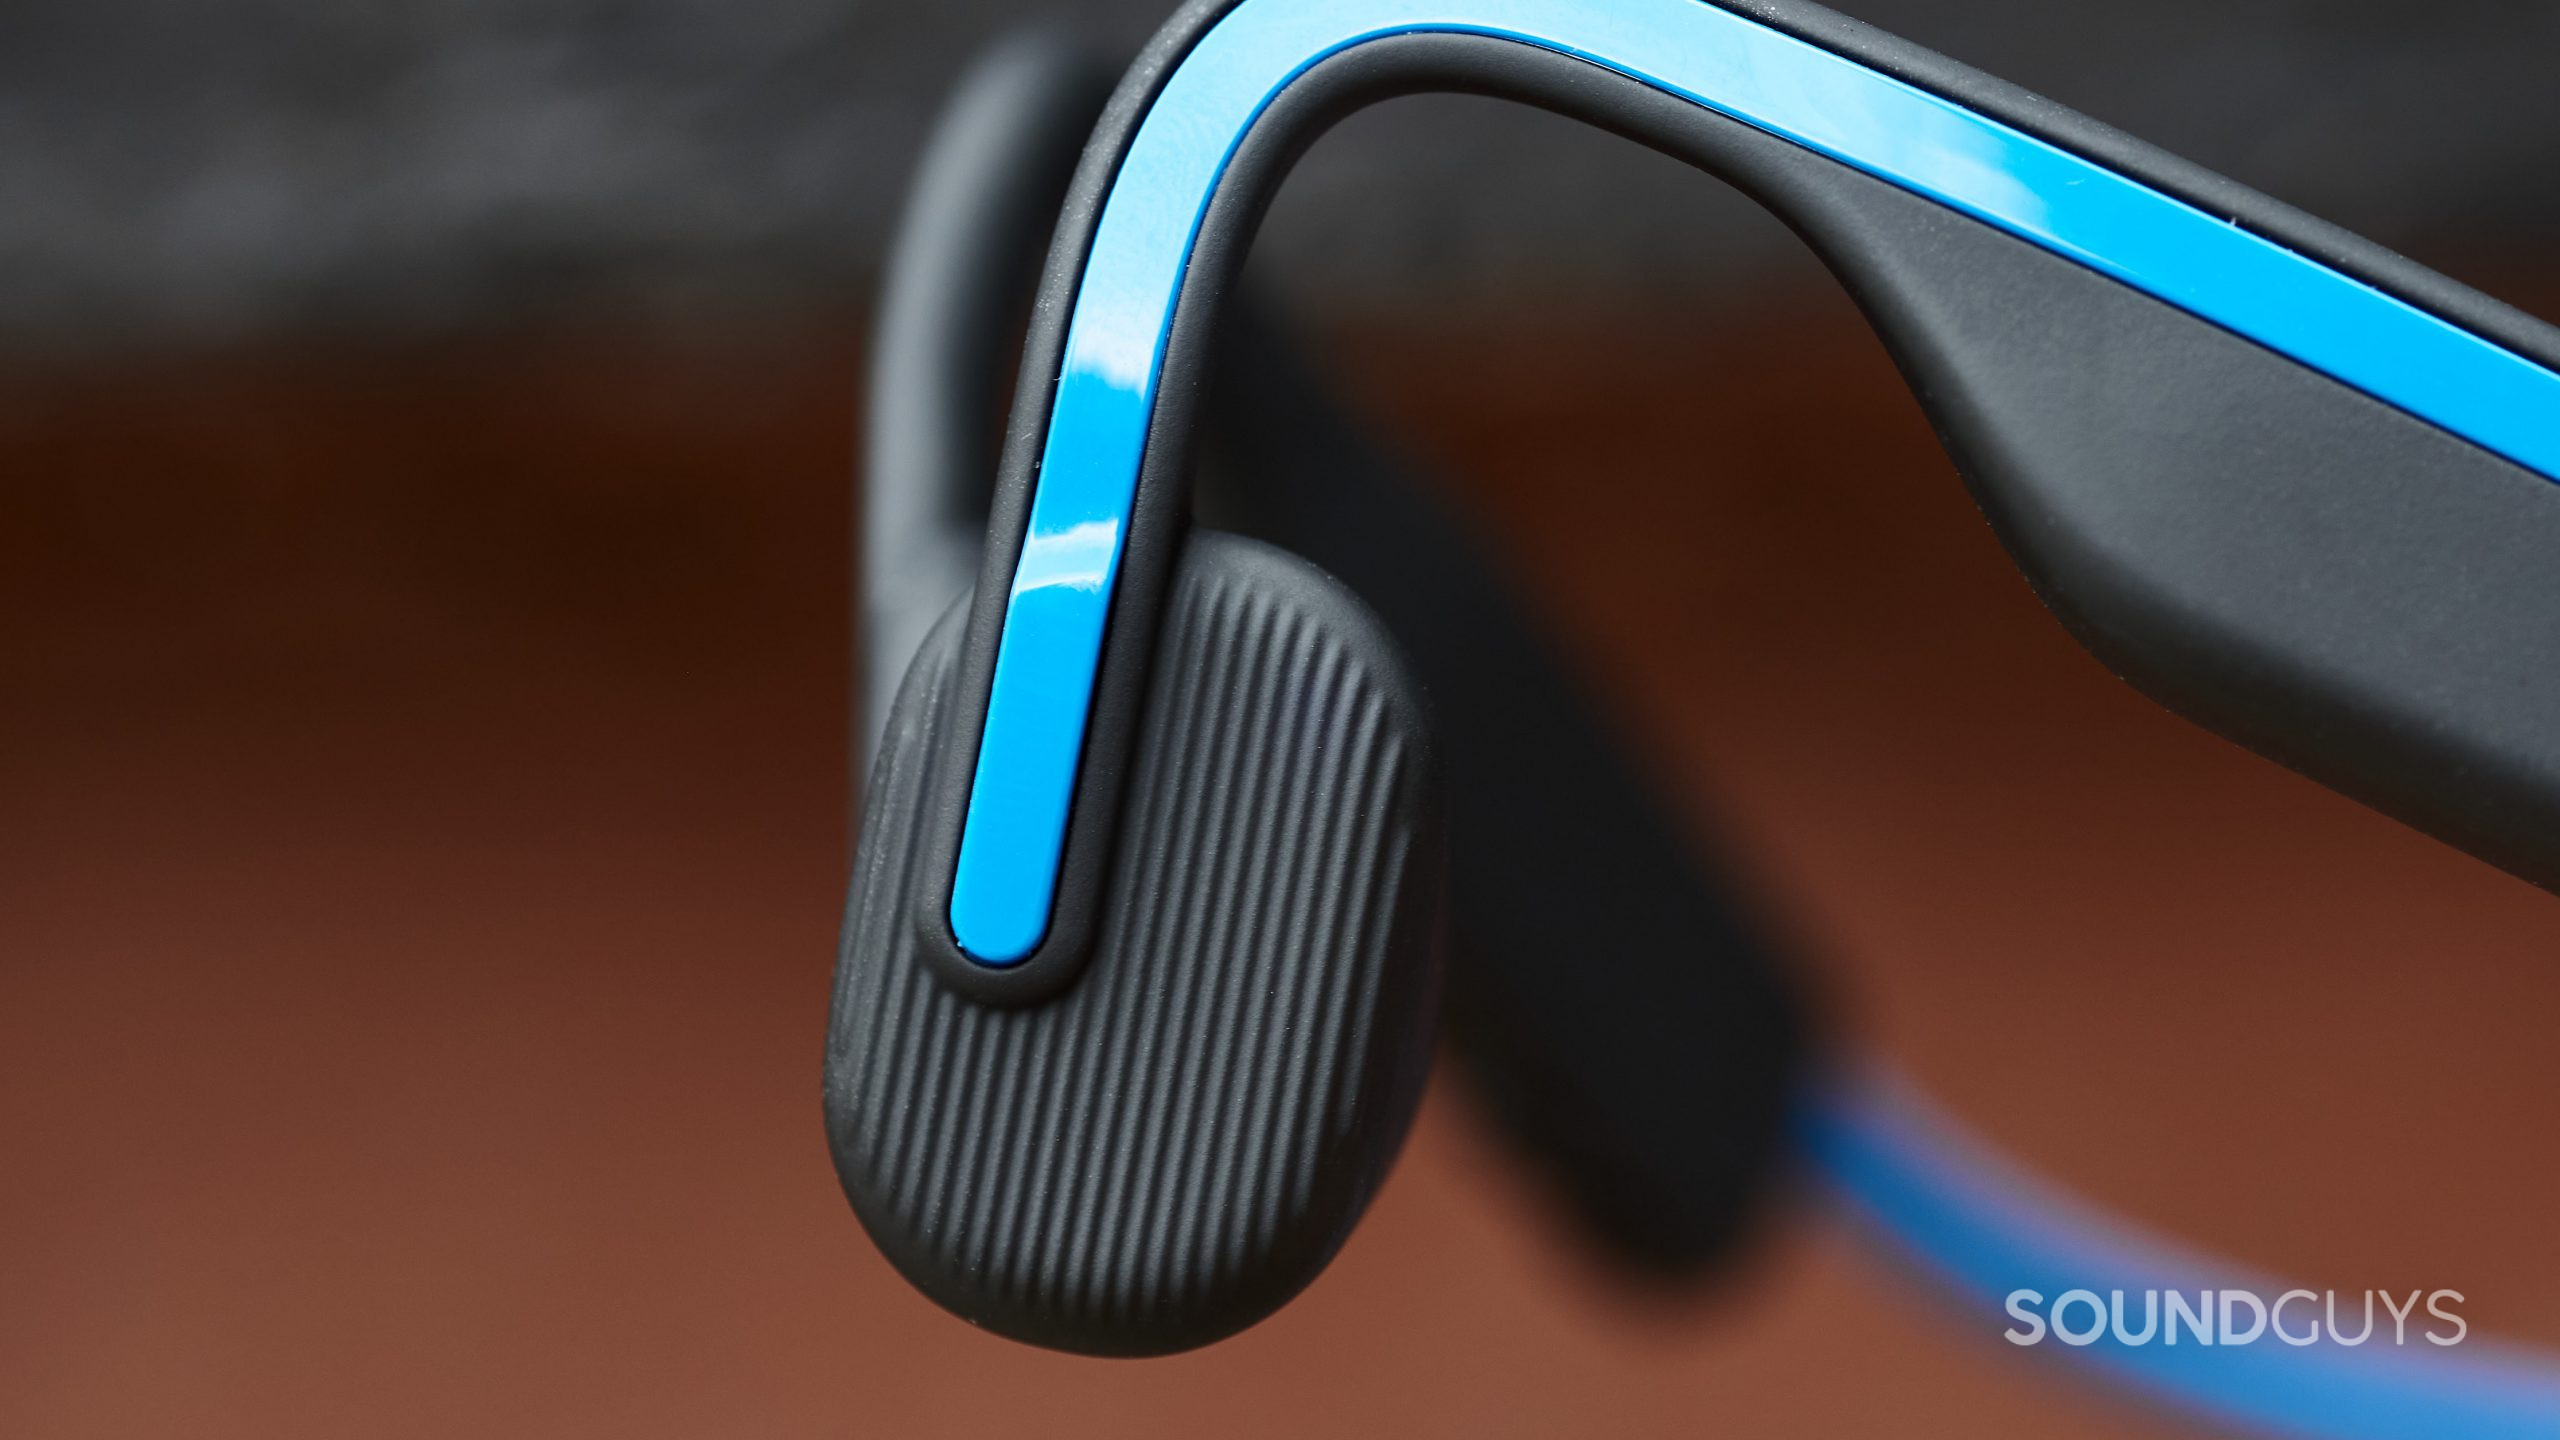 A close-up of the Shokz OpenMove bone conduction headphones' multi-function button on the left ear piece.